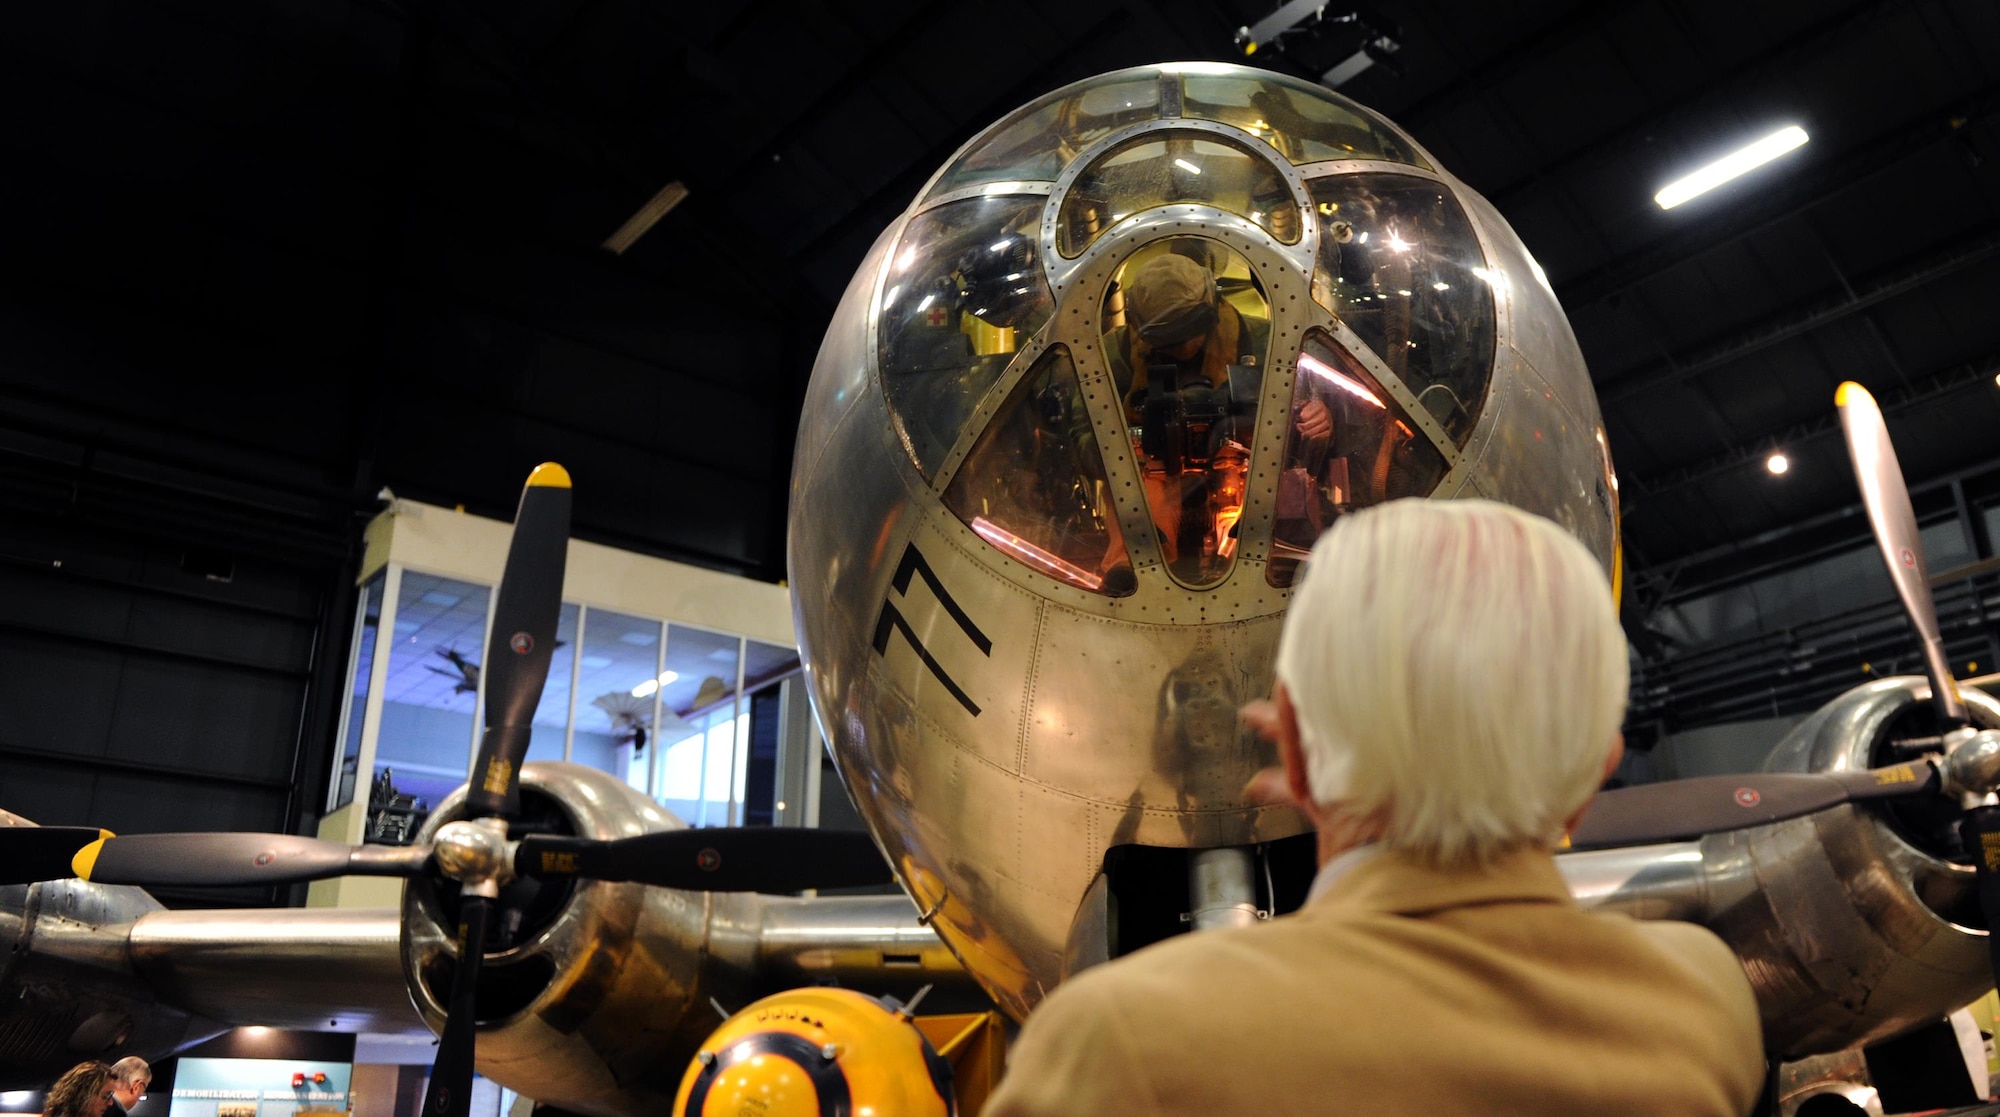 Victor Bilek, a retired National Air and Space Intelligence Center Airman, stares up at a B-29 Superfortress  Wednesday, Dec. 9, 2015 at the National Air Force Museum. He worked on experimental armament for the airplane during WWII. As a non-rated officer, he had more flying hours in the plane than any other person on Wright Field at the time. At 97 years old, Bilek is the oldest living NASIC alum. He recently came to the Center to share his war stories with today's generation of Airmen. (U.S. Air Force photo by Tech. Sgt. Raymond Hoy)